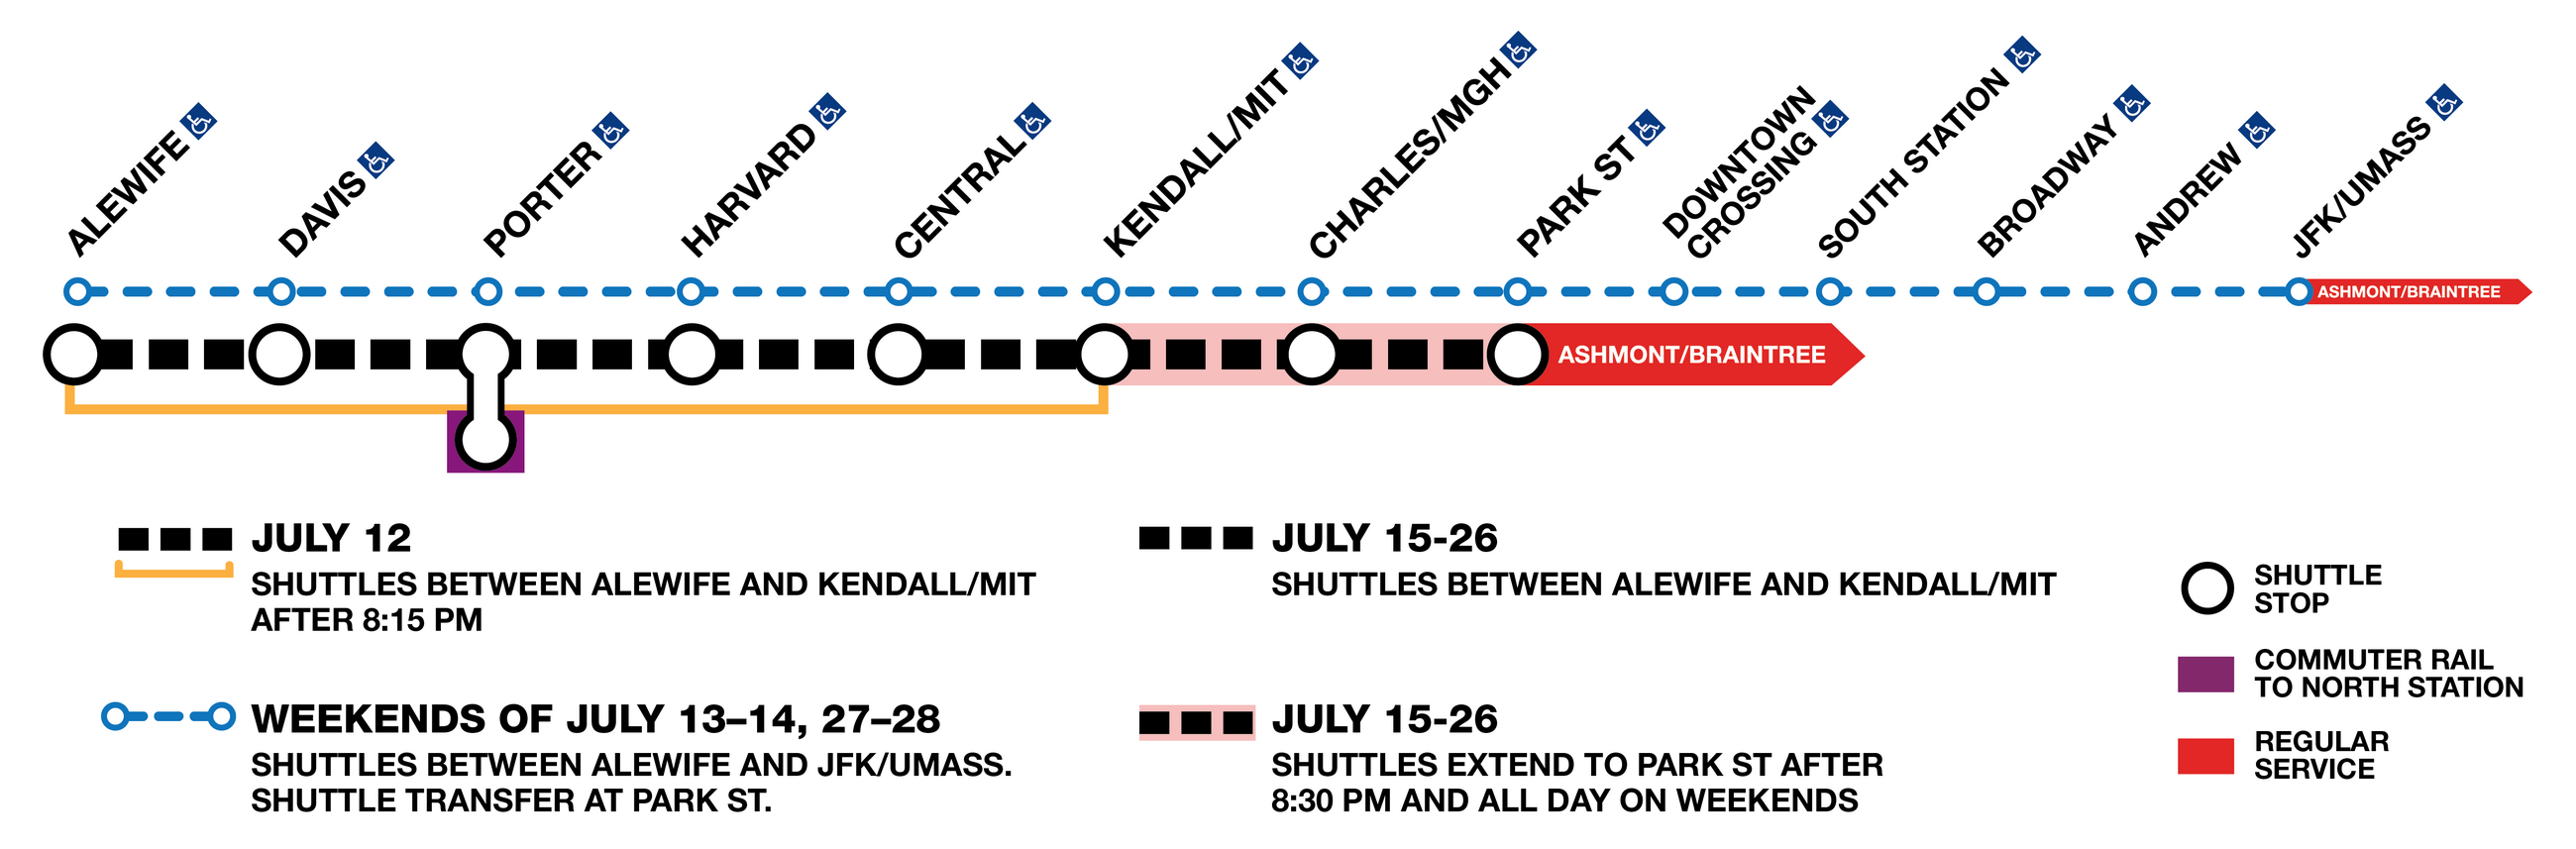 Shuttle service graphic for the Red Line closure 